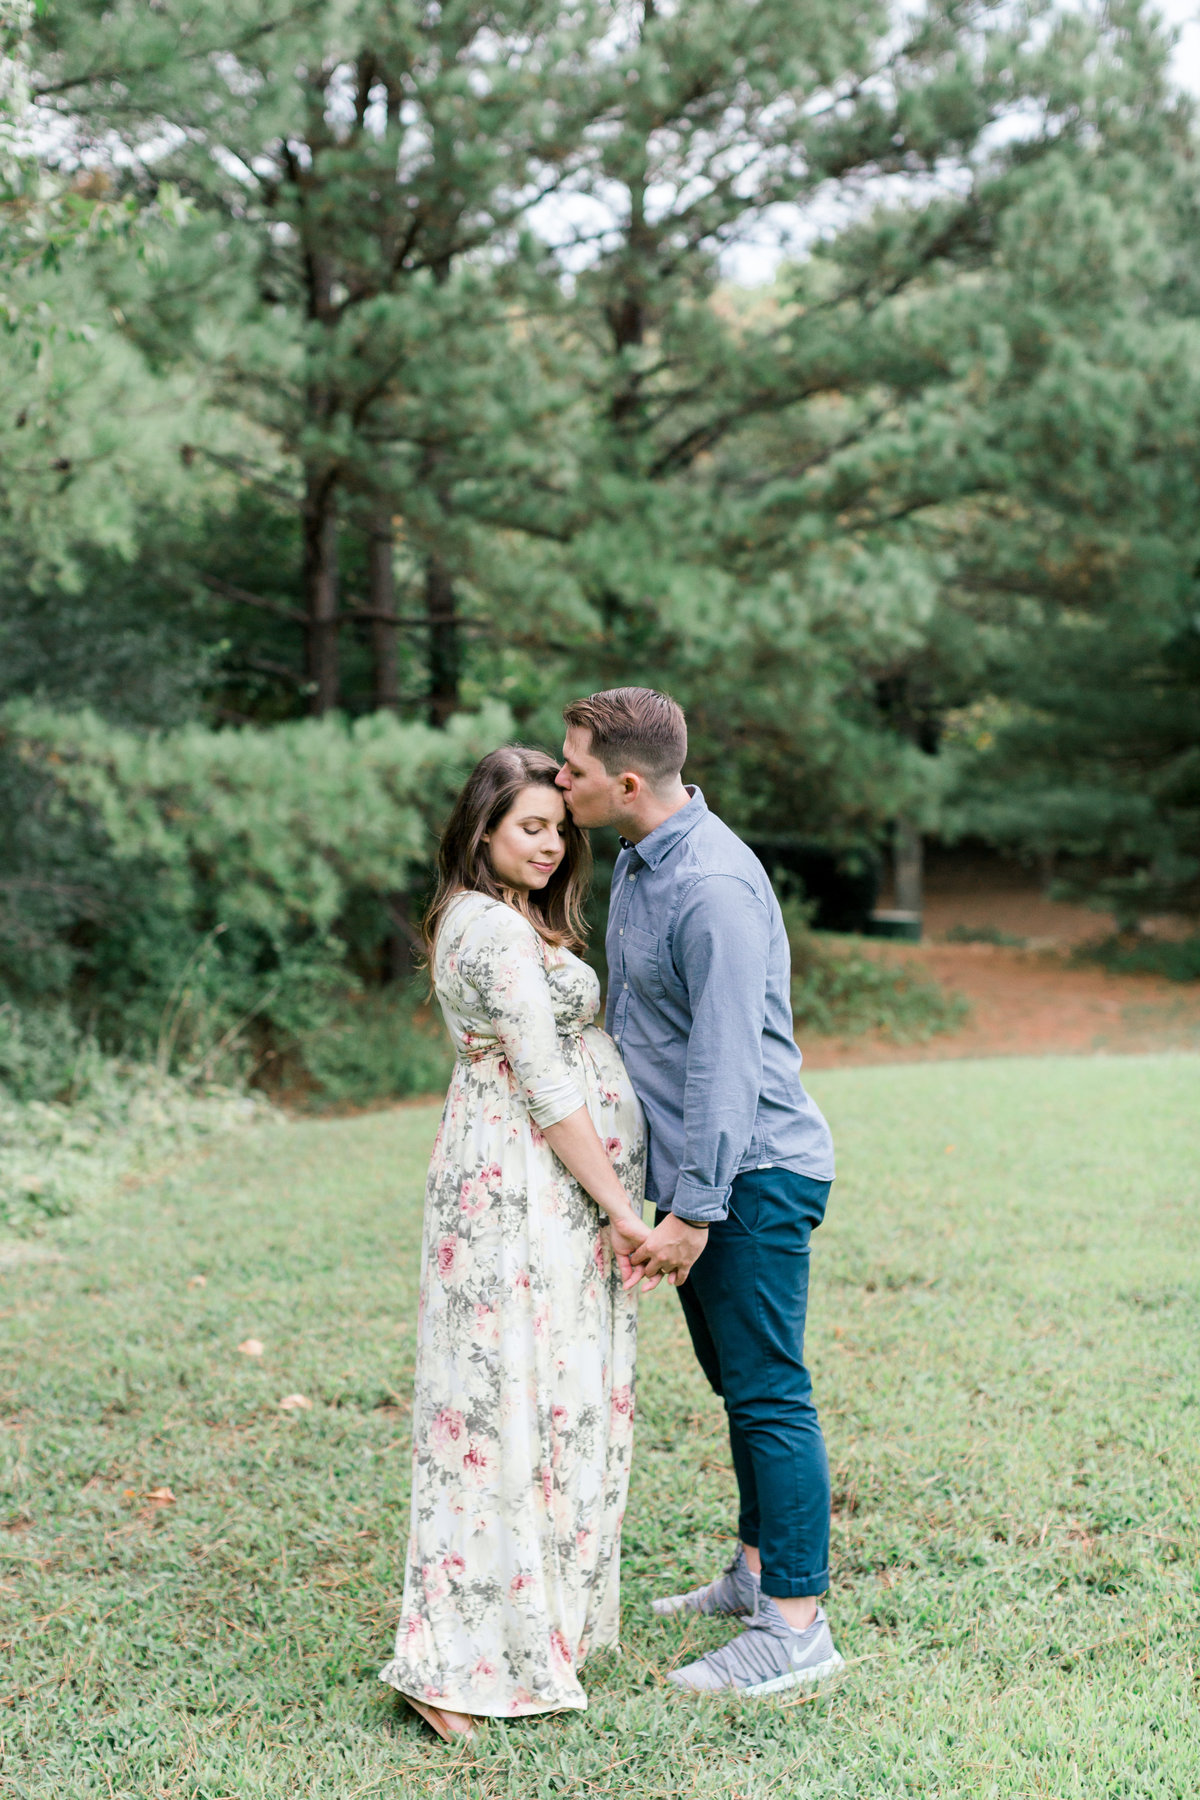 Dave and Emily-Maternity Session-Samantha Laffoon Photography-54